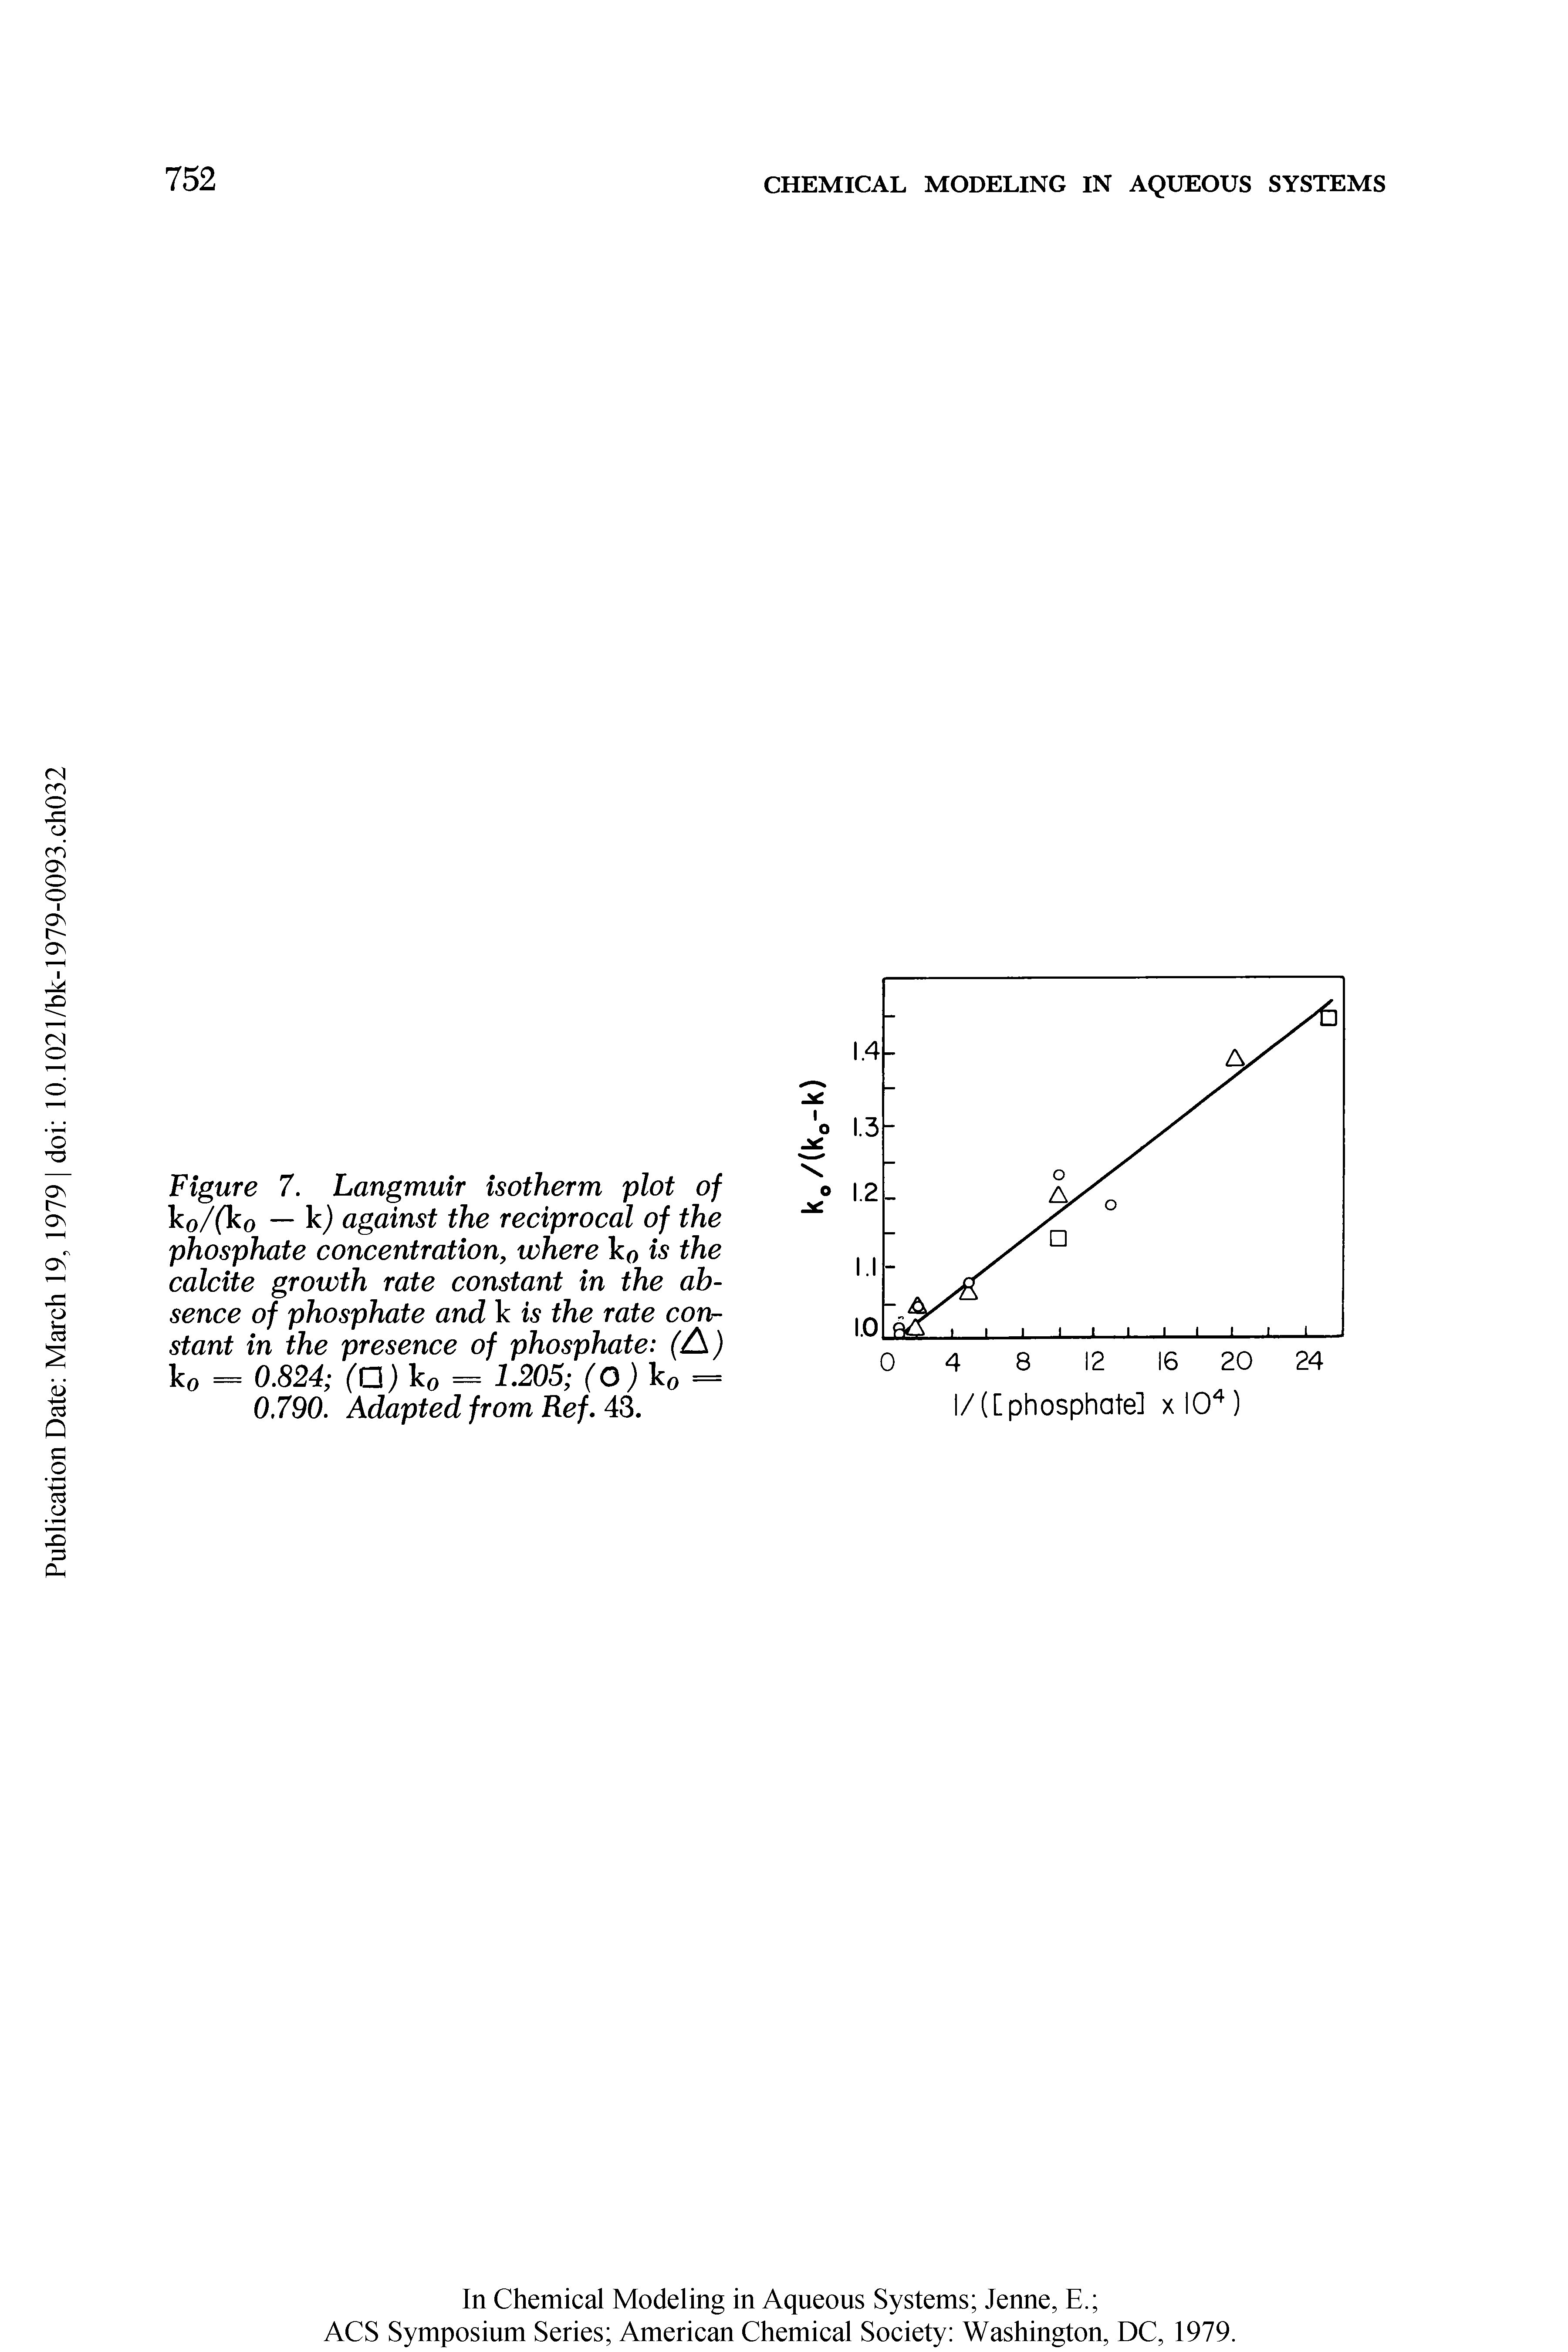 Figure 7. Langmuir isotherm plot of ko/(T o — k) against the reciprocal of the phosphate concentration, where ko is the calcite growth rate constant in the absence of phosphate and k is the rate constant in the presence of phosphate ( ) ko = 0.824 (n)ko = 1.205 (O)ko = 0.790. Adapted from Ref. 43.